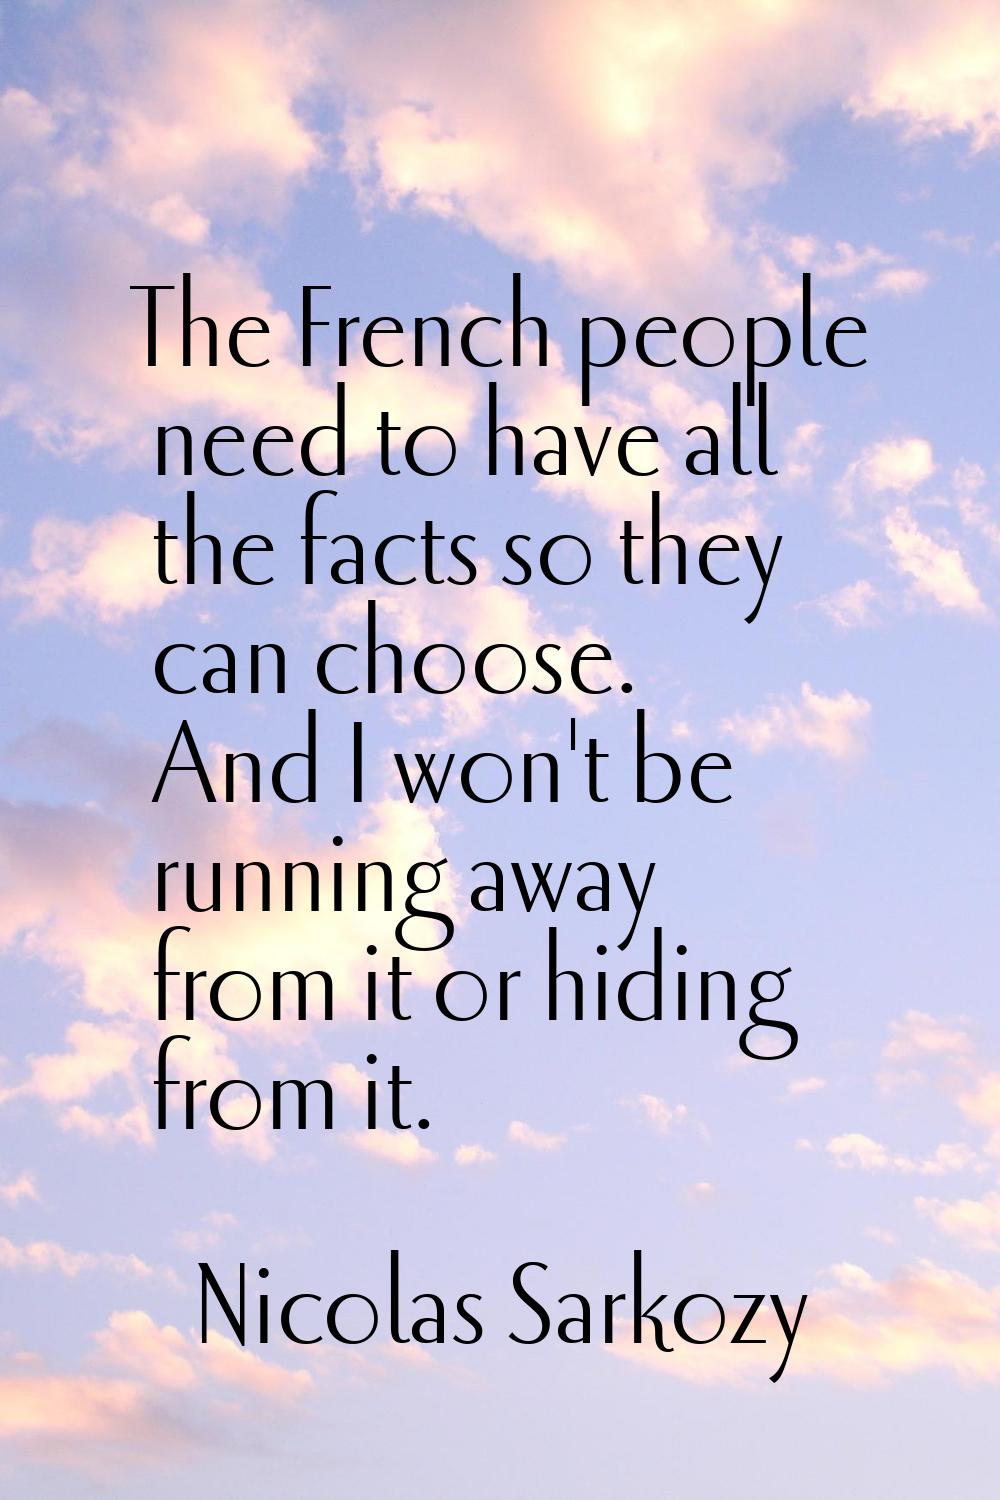 The French people need to have all the facts so they can choose. And I won't be running away from i